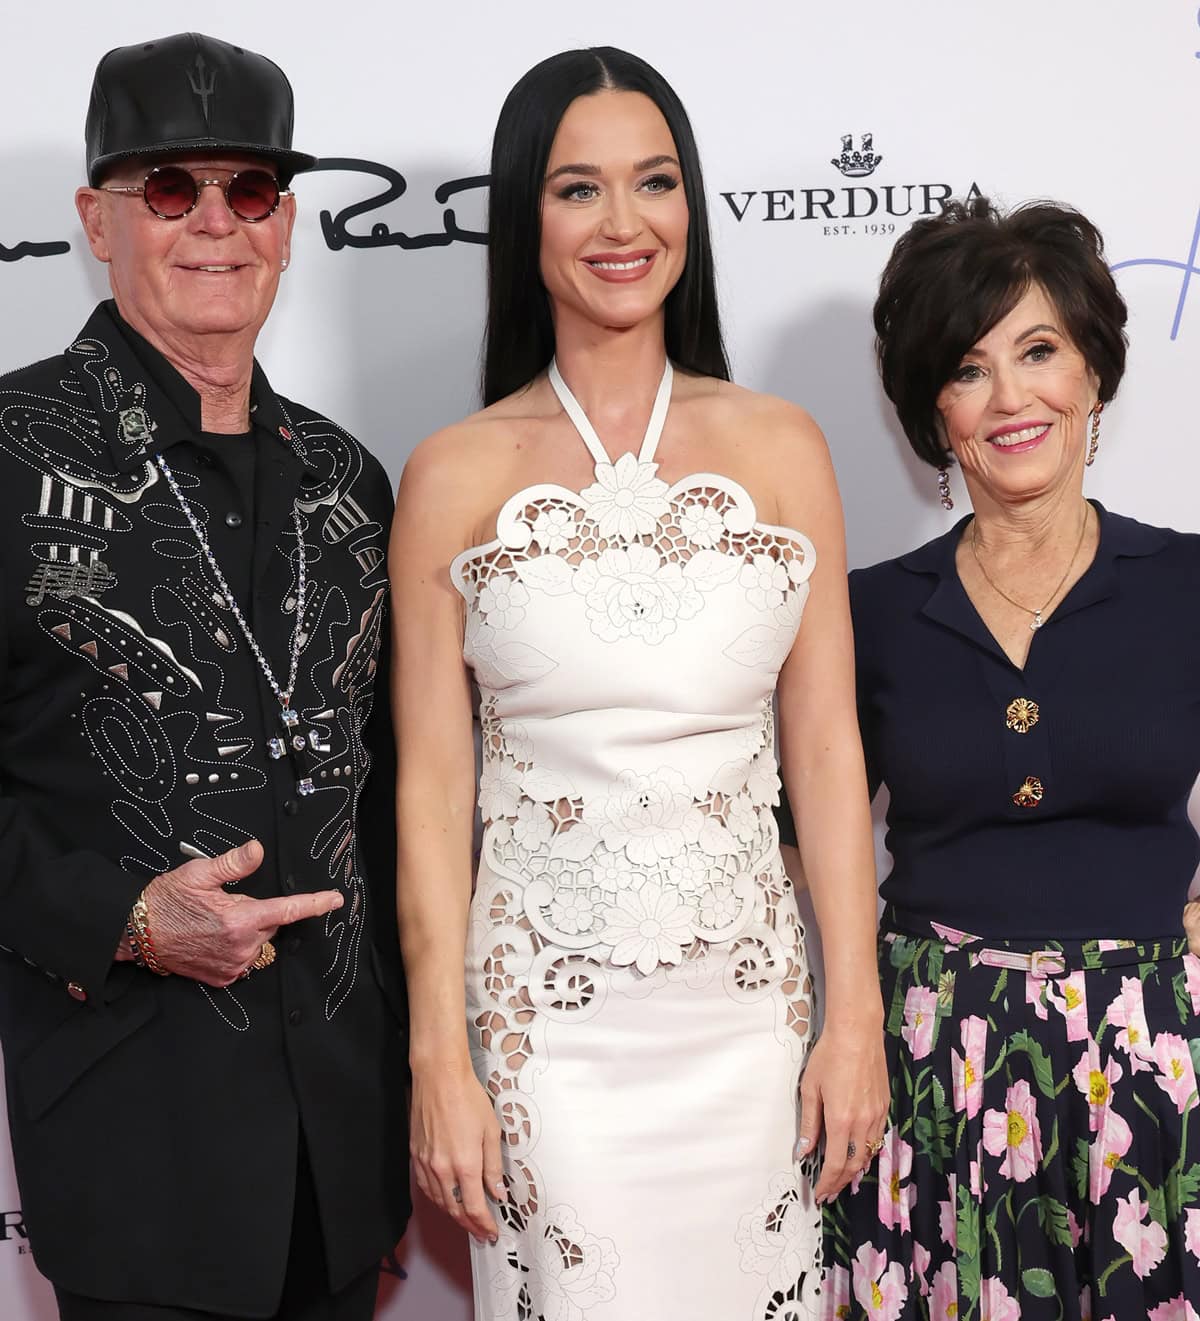 United in Love: Despite differing views, Katy Perry radiates affection with her parents at a Beverly Hills event, embodying the family's bond and mutual admiration